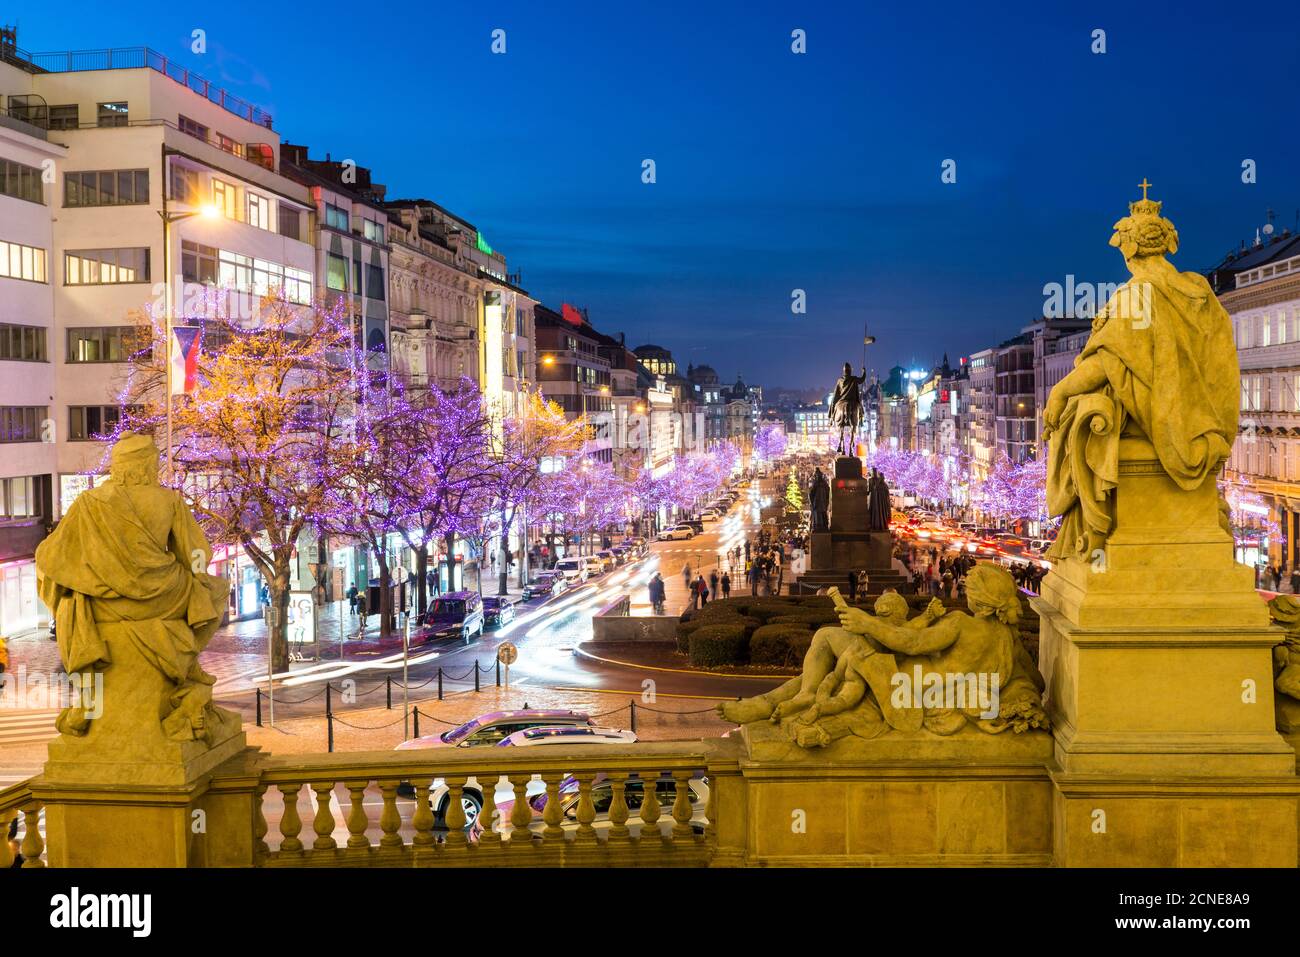 Christmas decorations and markets through statues of National Museum at Wenceslas Square, New Town, Prague, Czech Republic, Europe Stock Photo